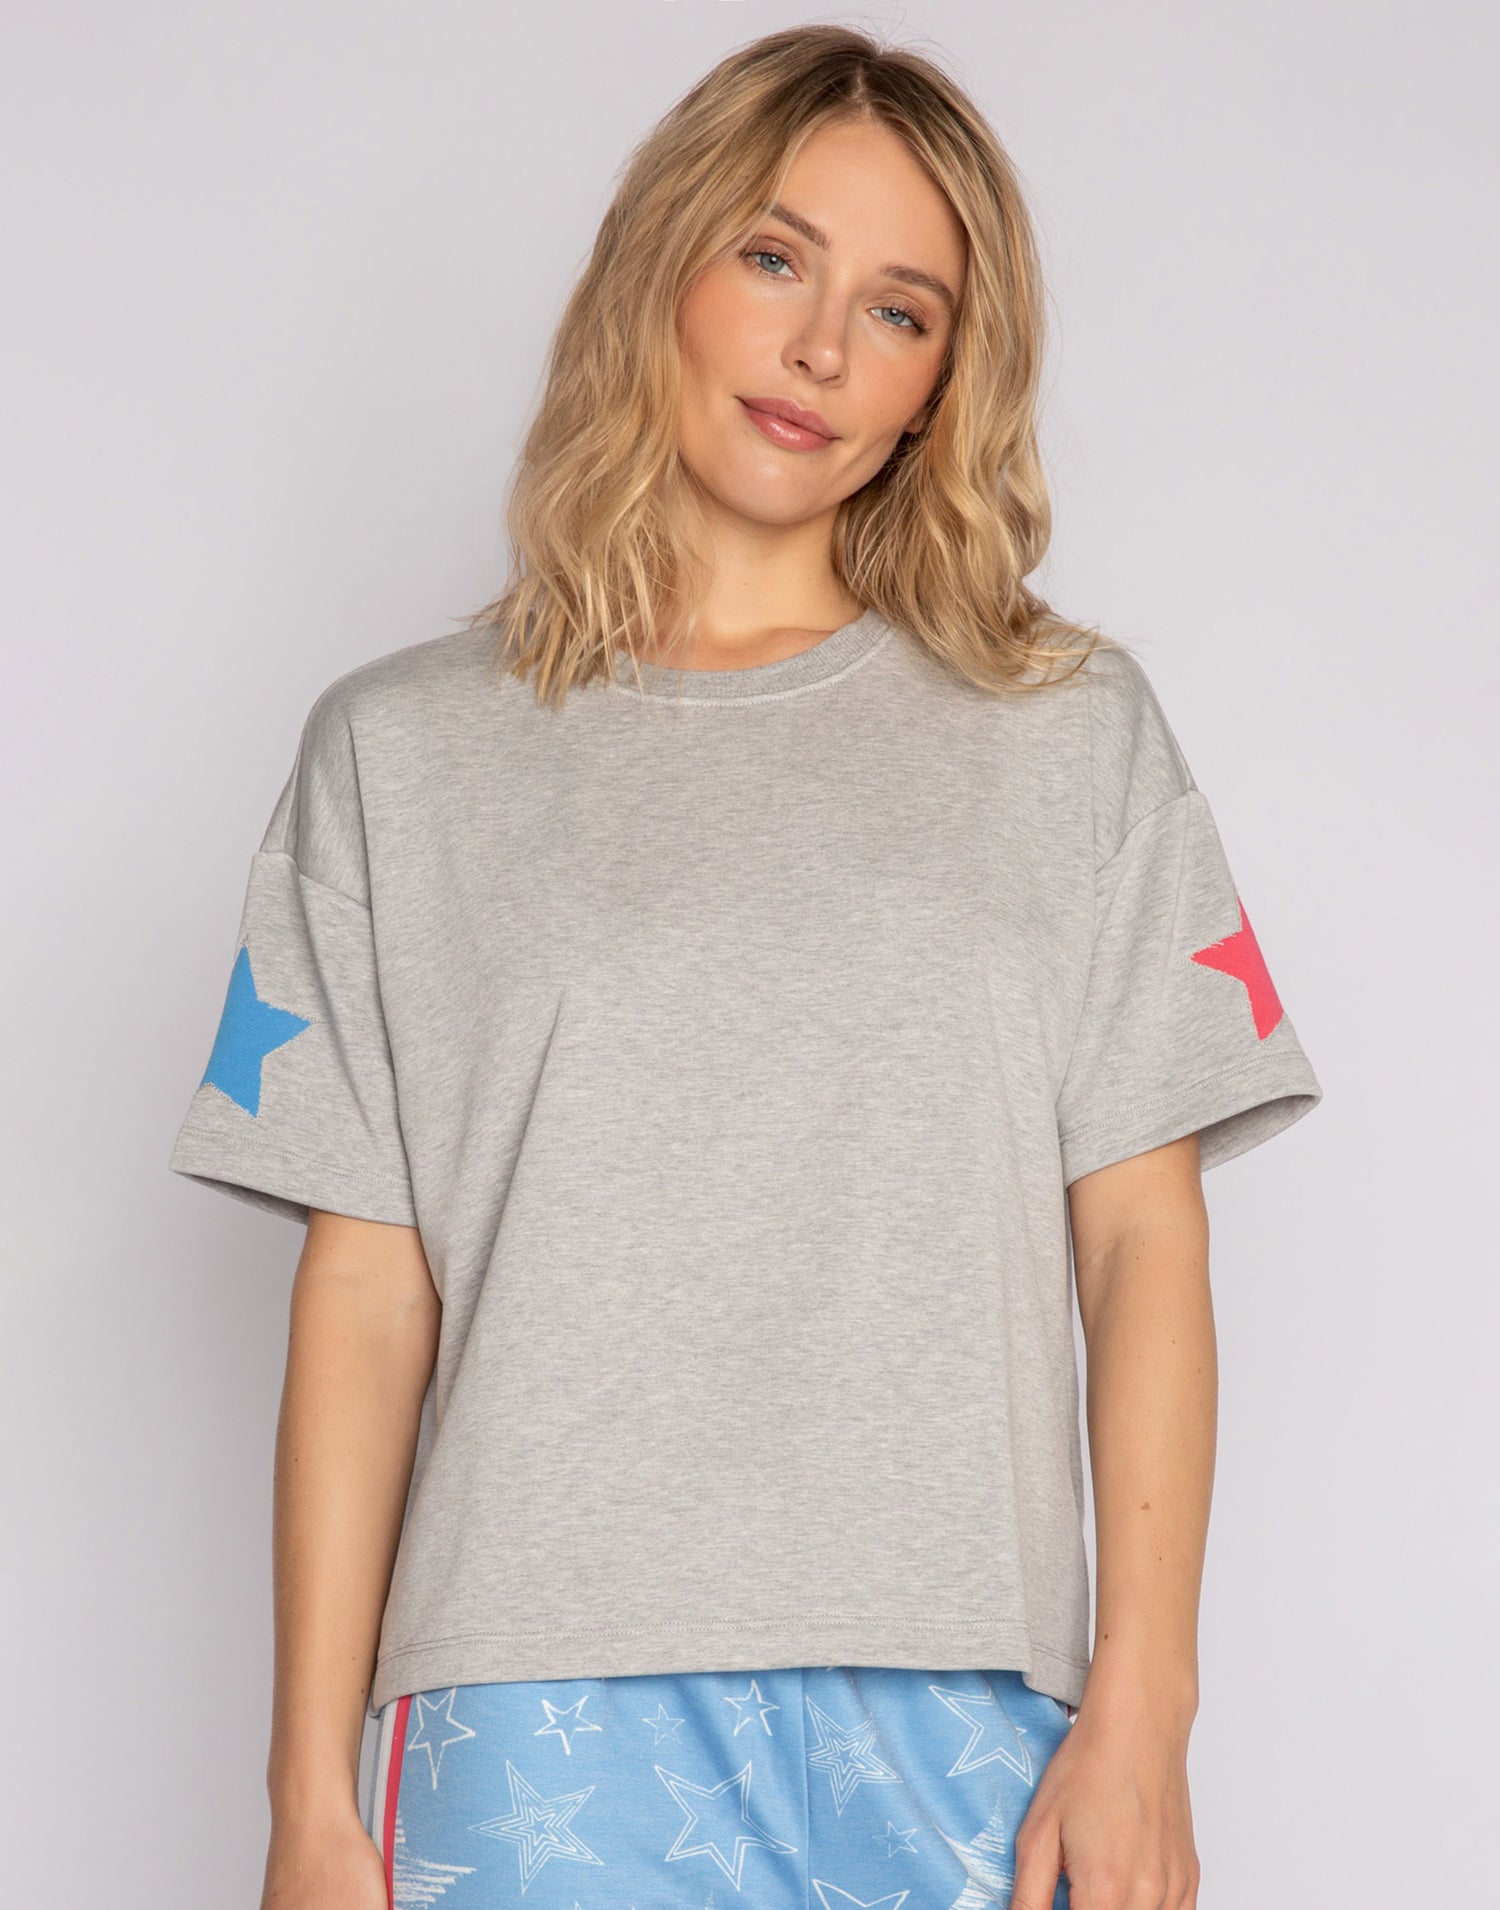 Star Spangled Tee by P.J. Salvage in Heather Grey - Front View